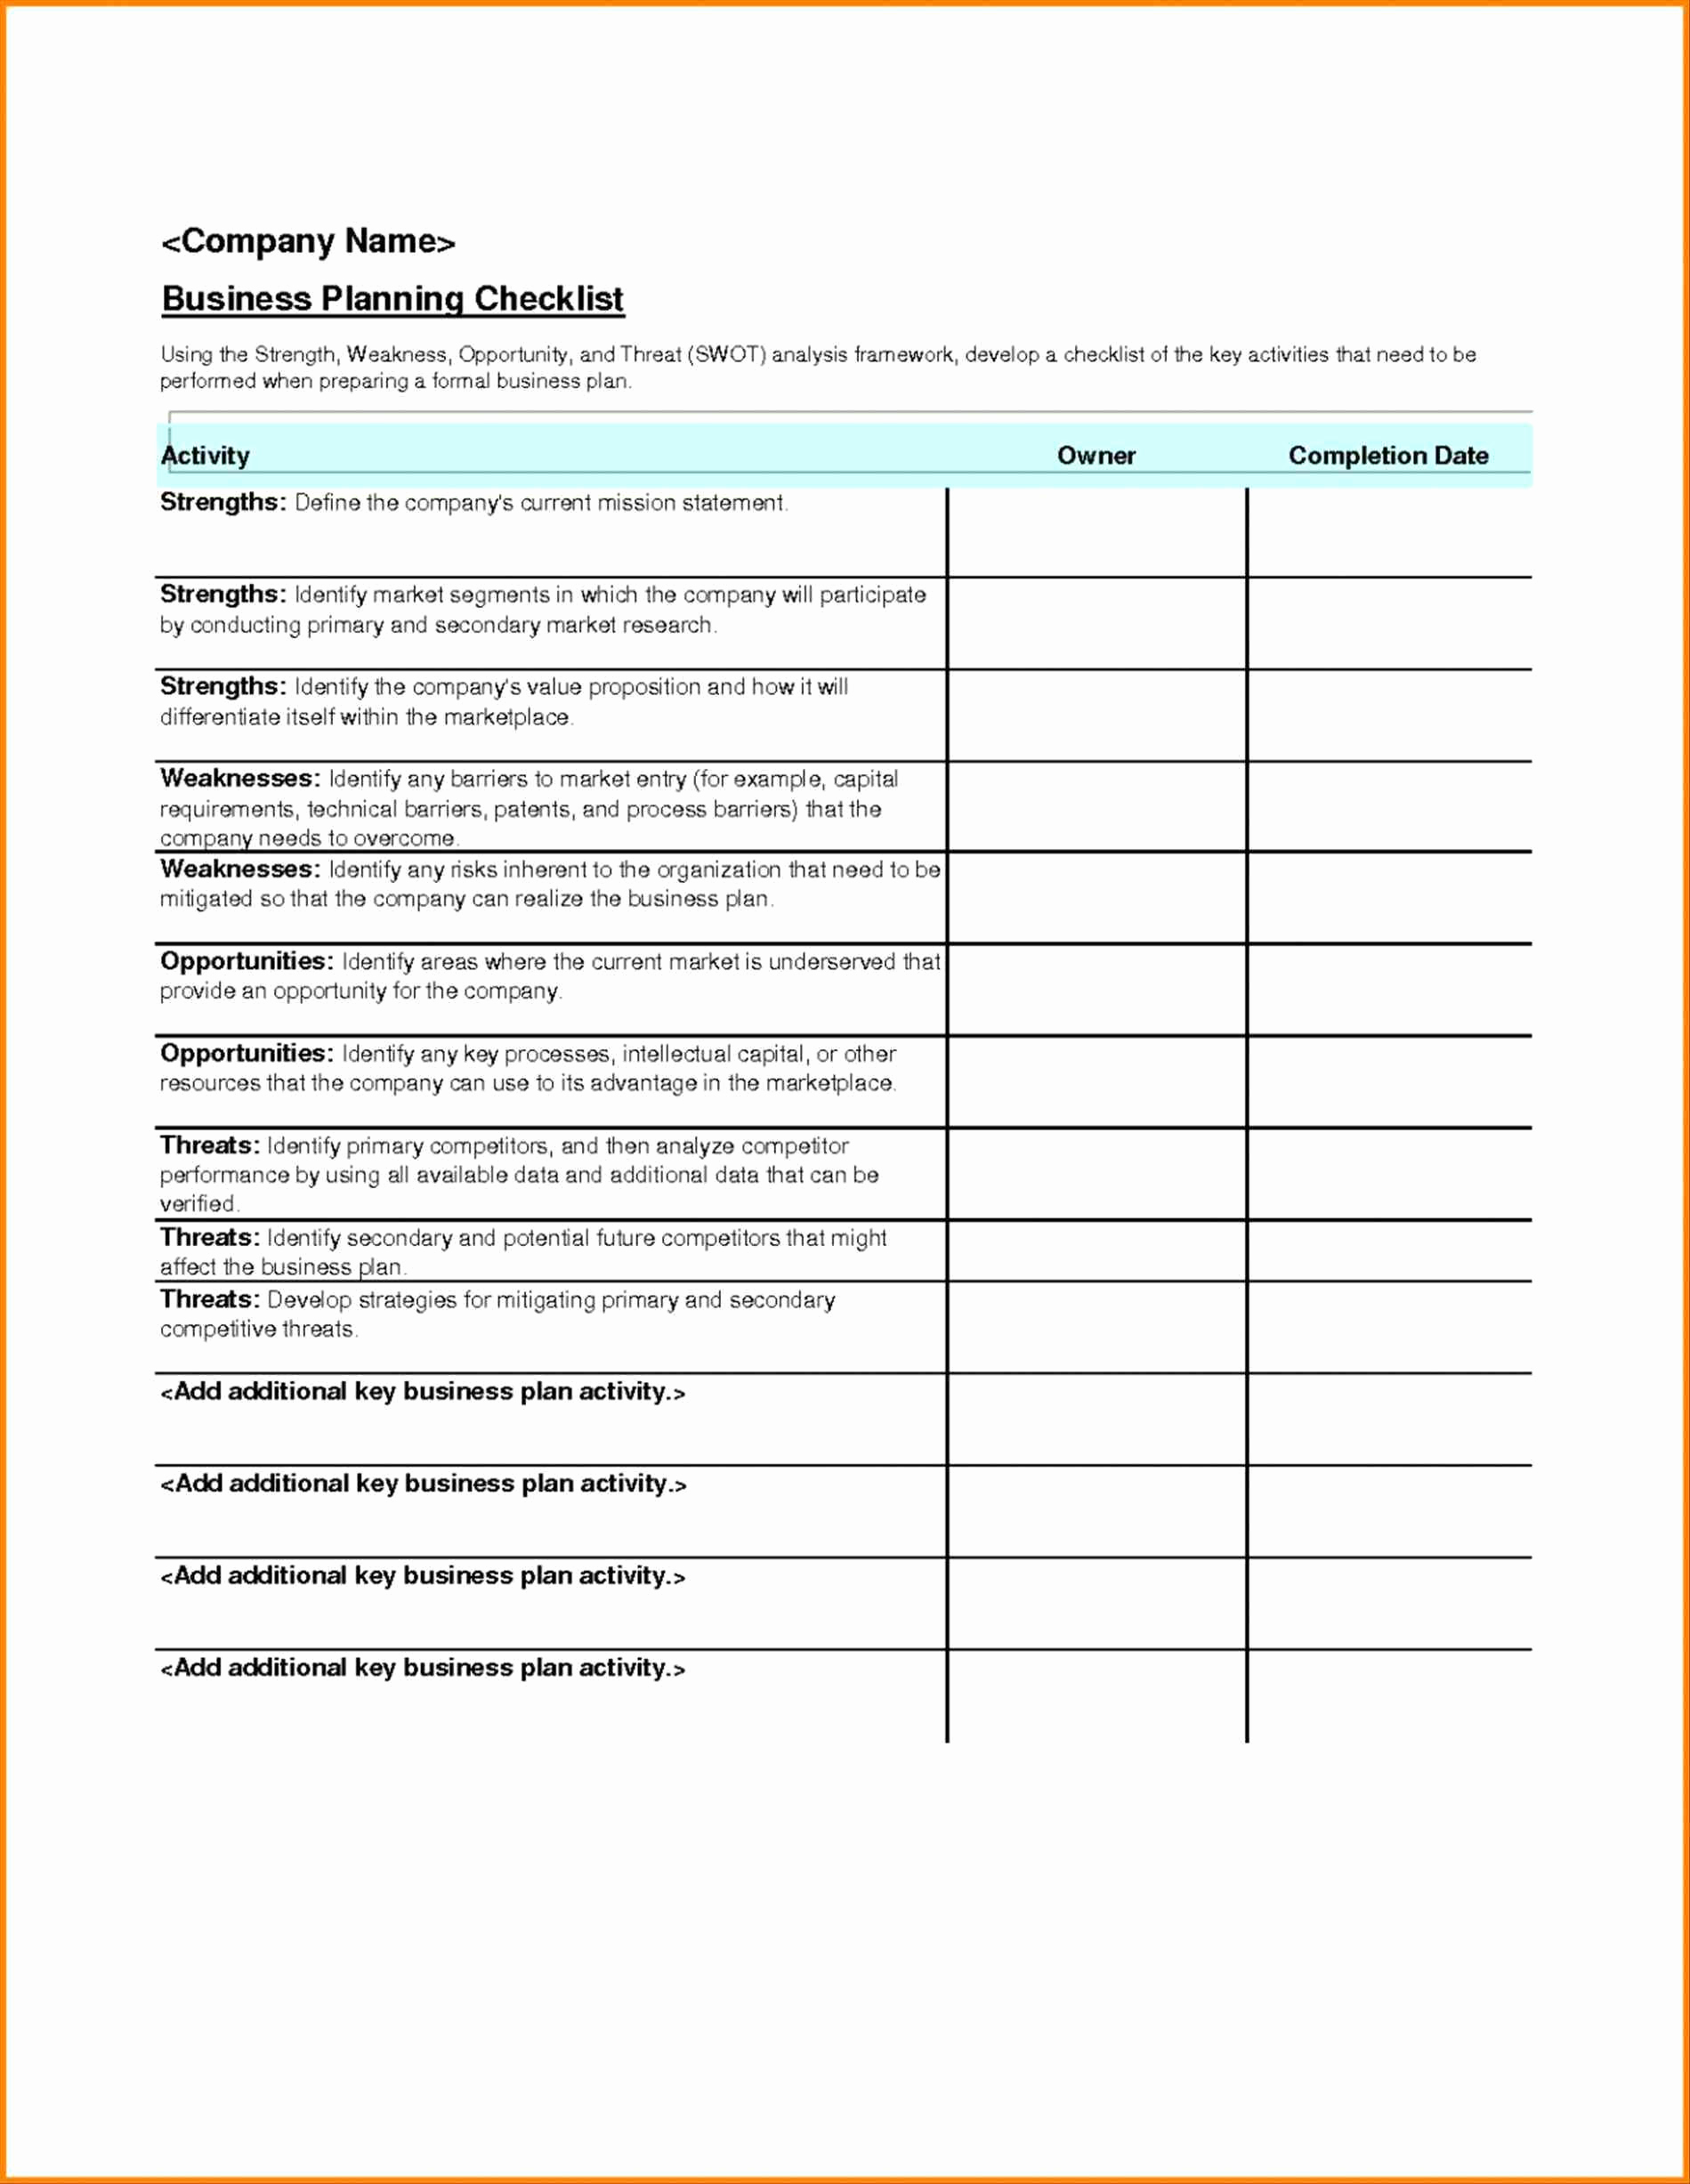 Simple Accounting Spreadsheet Best Of Simple Accounting Spreadsheet in Accounting Spreadsheet Template Free